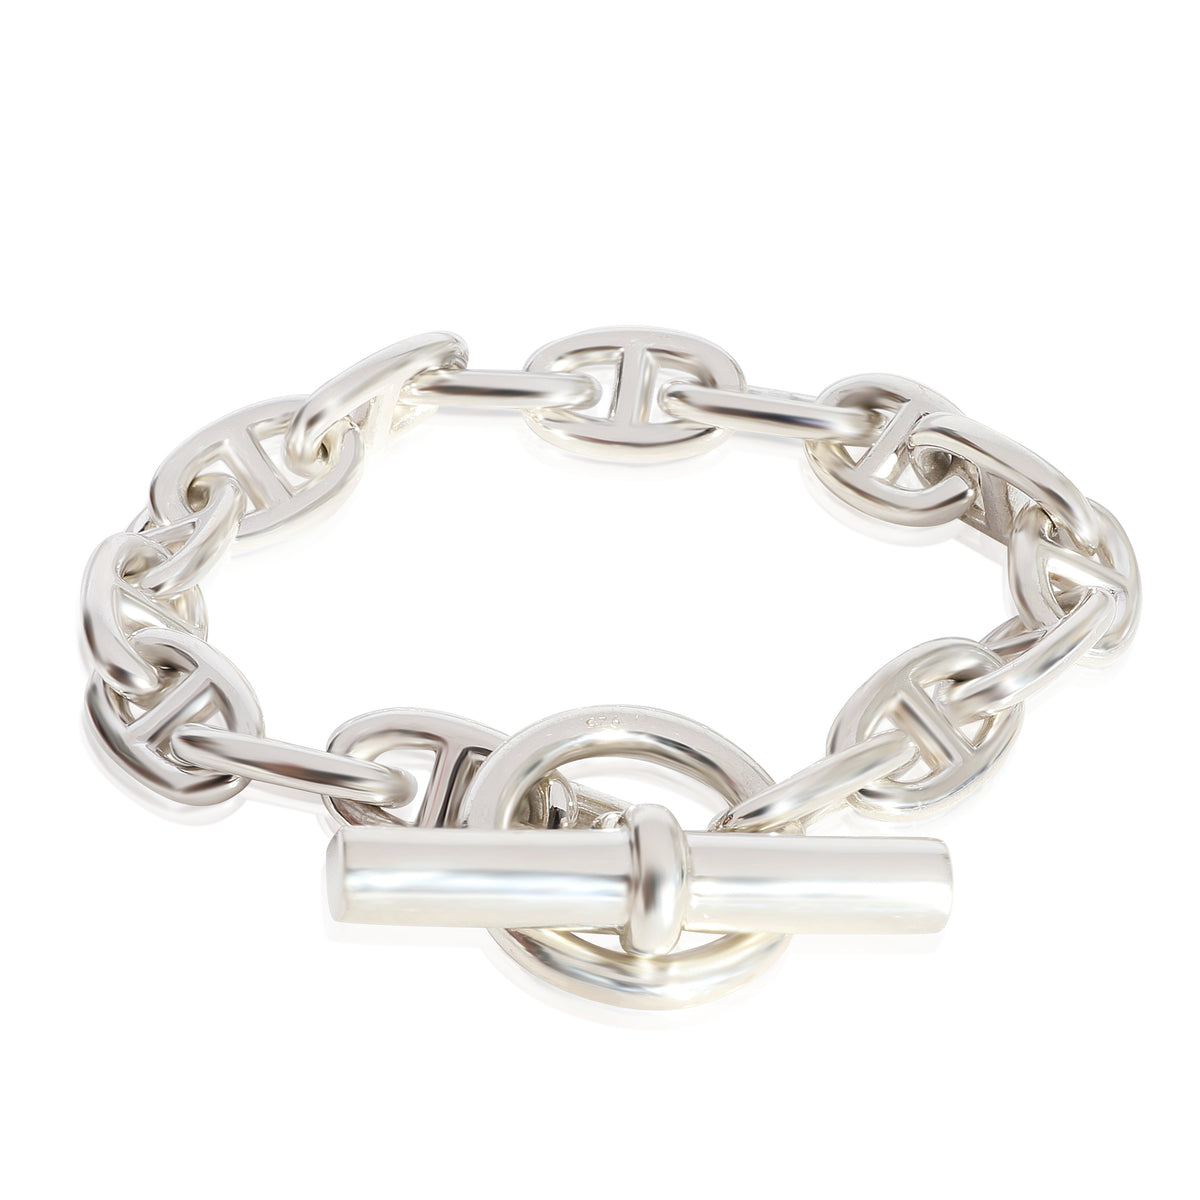 Hermès Chaine D'ancre Bracelet in 925 Sterling Silver